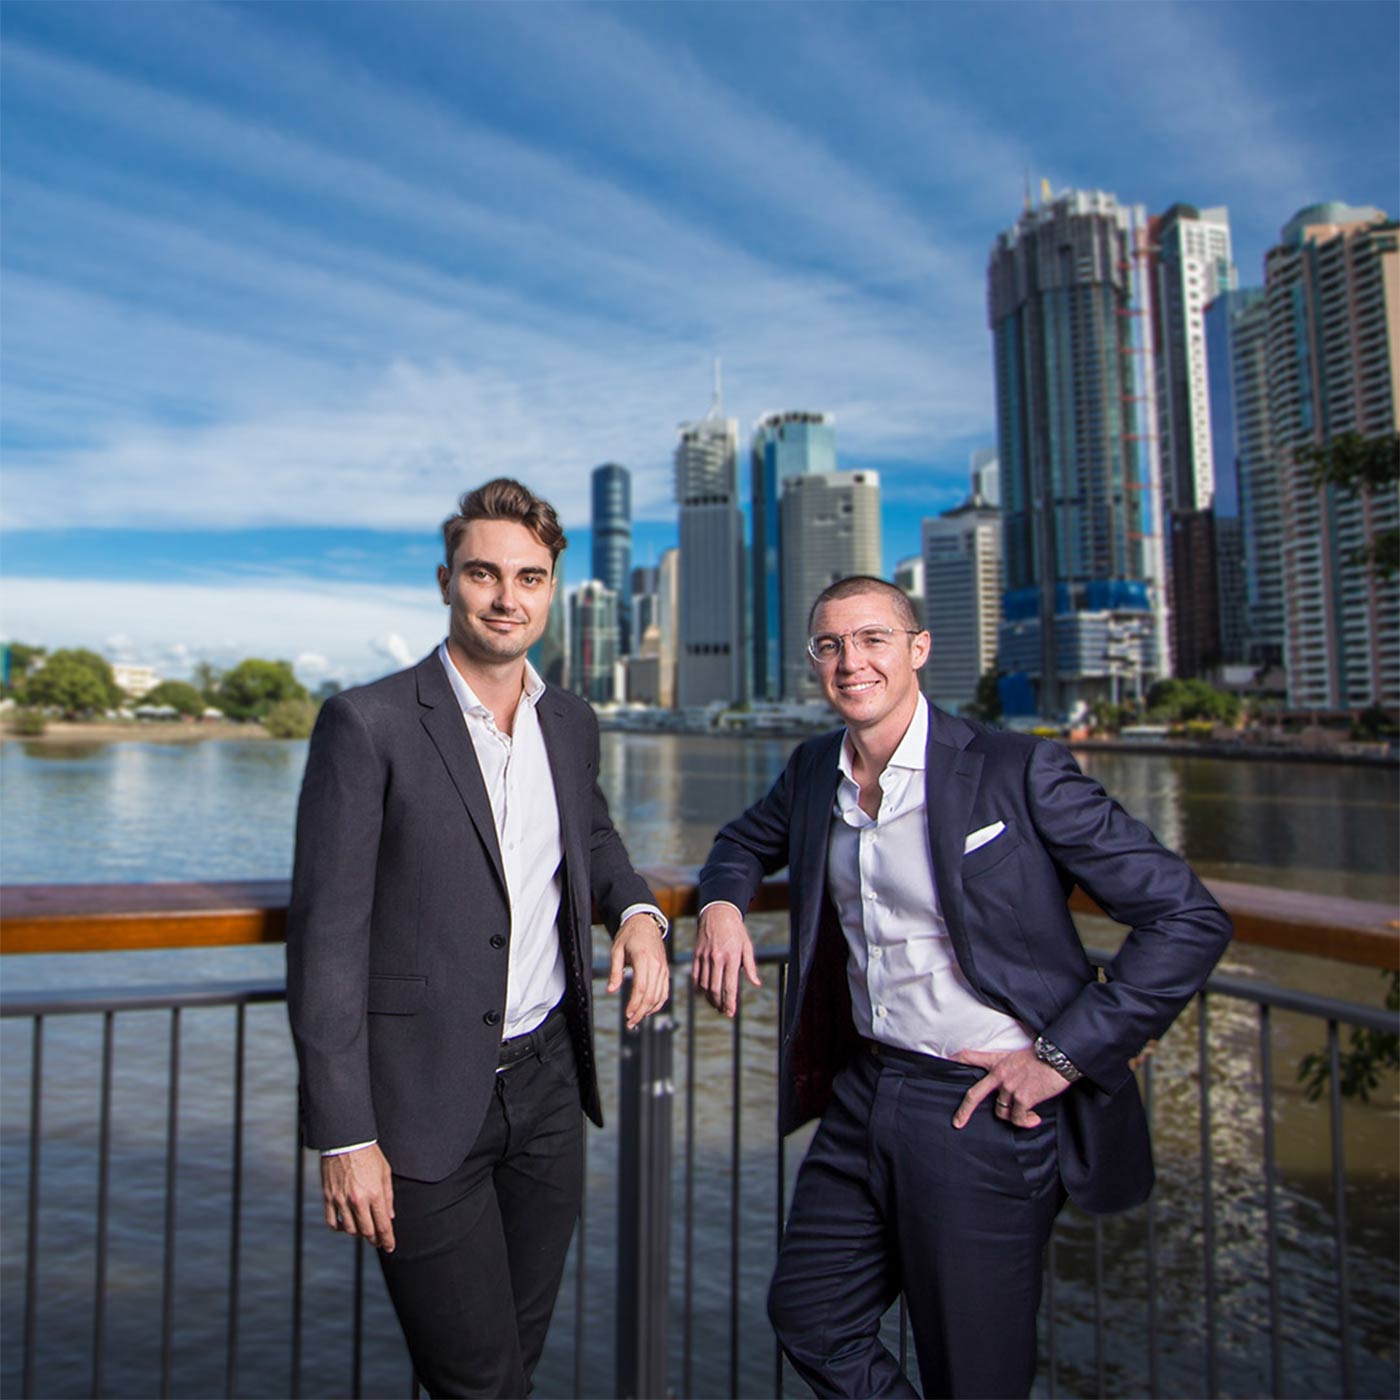 Audeara founders, Alex Afflick and Dr. James Fielding standing in front of the Brisbane River and cityscape